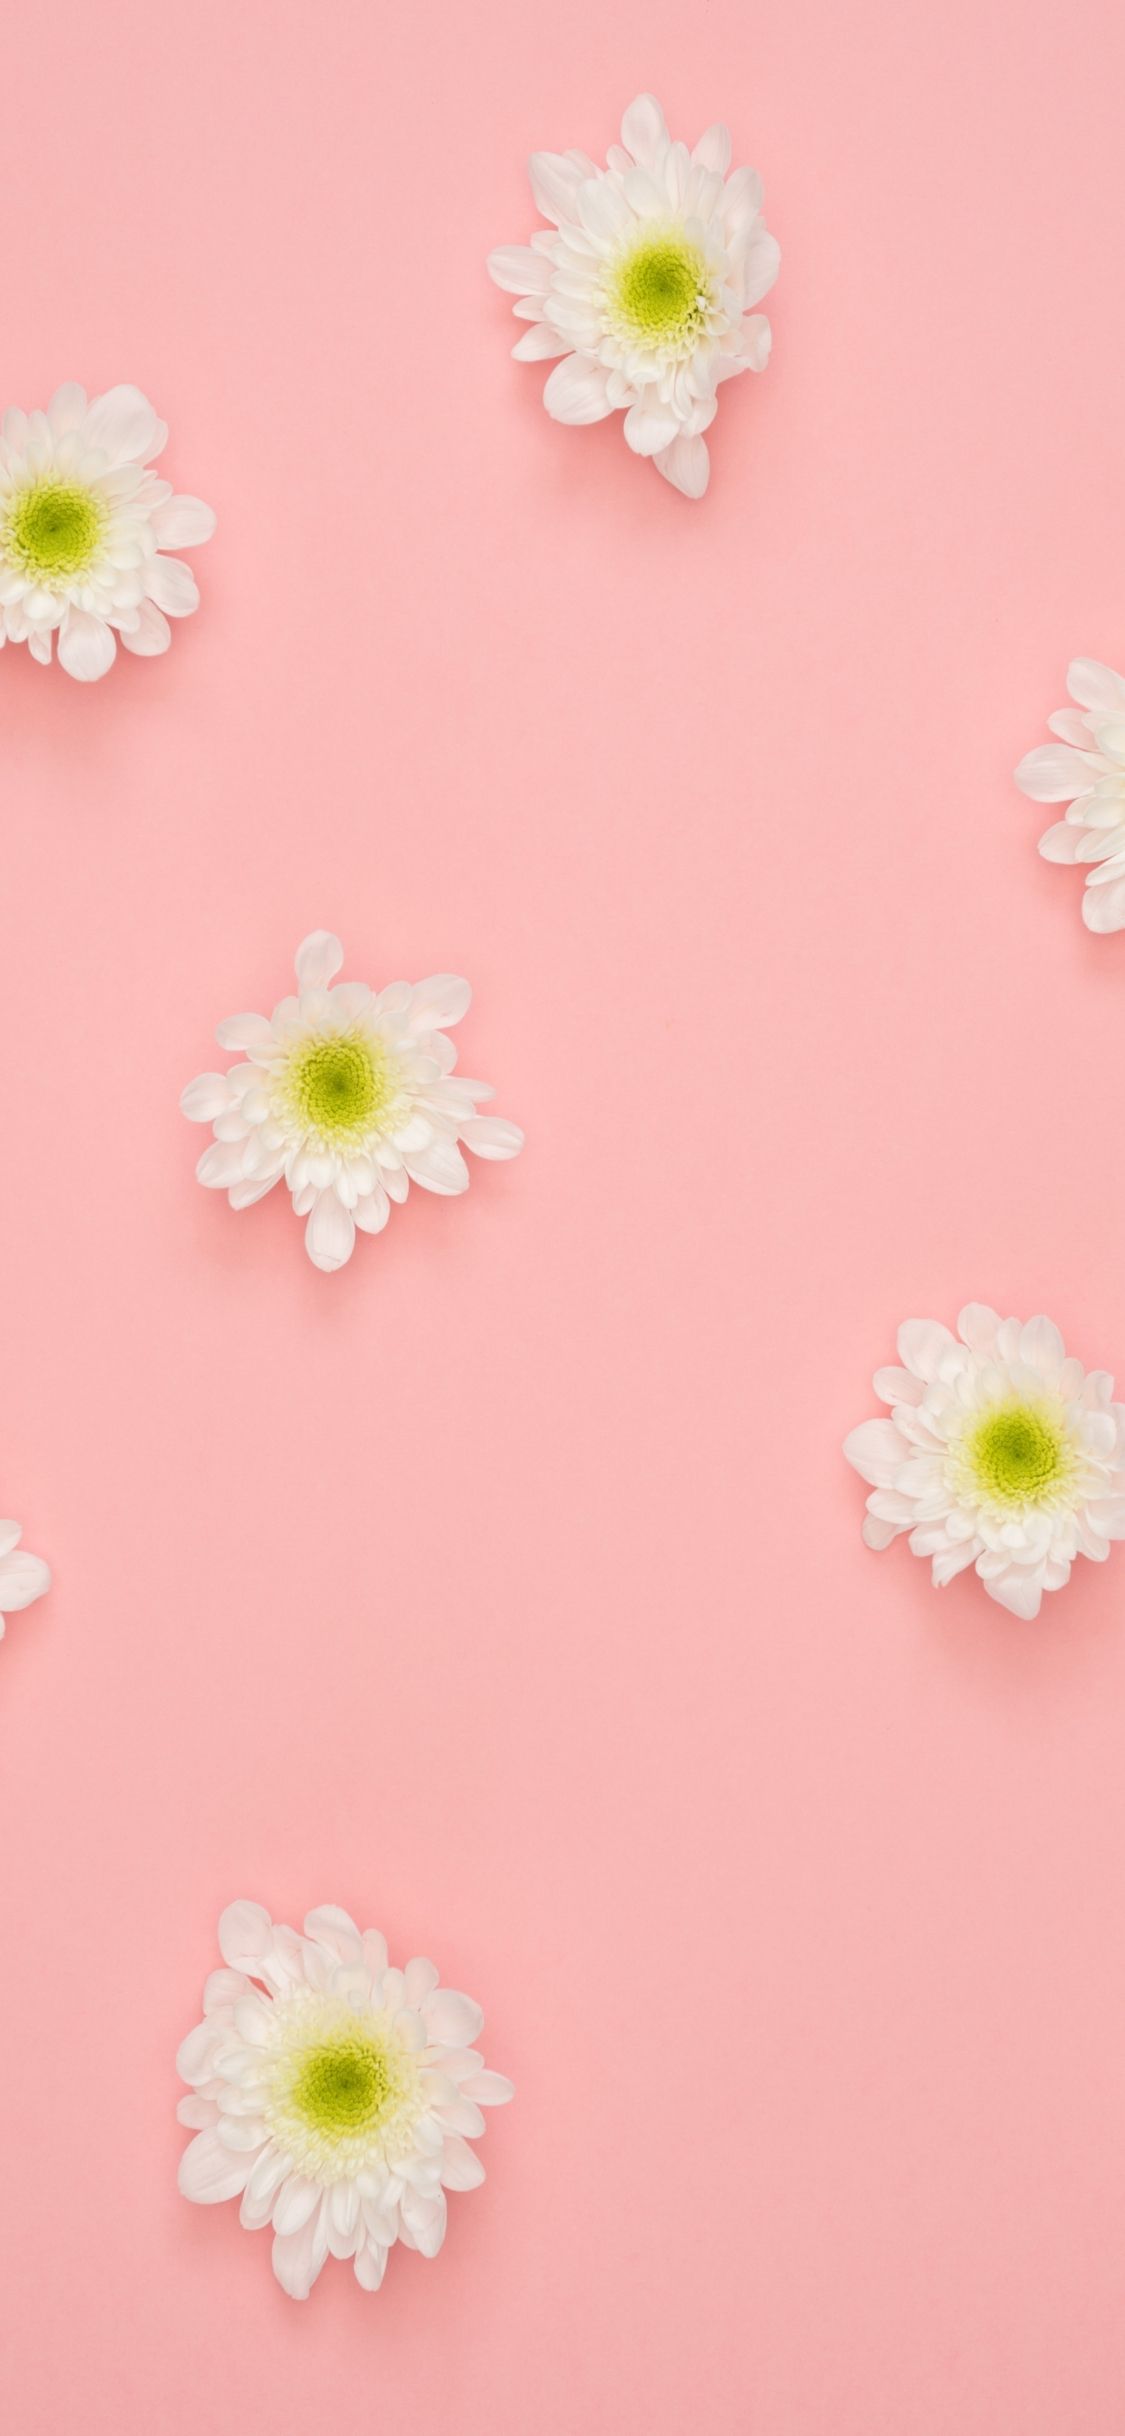 Download 1125x2436 wallpaper white flowers, minimal, iphone x 1125x2436 HD image, background, 8190